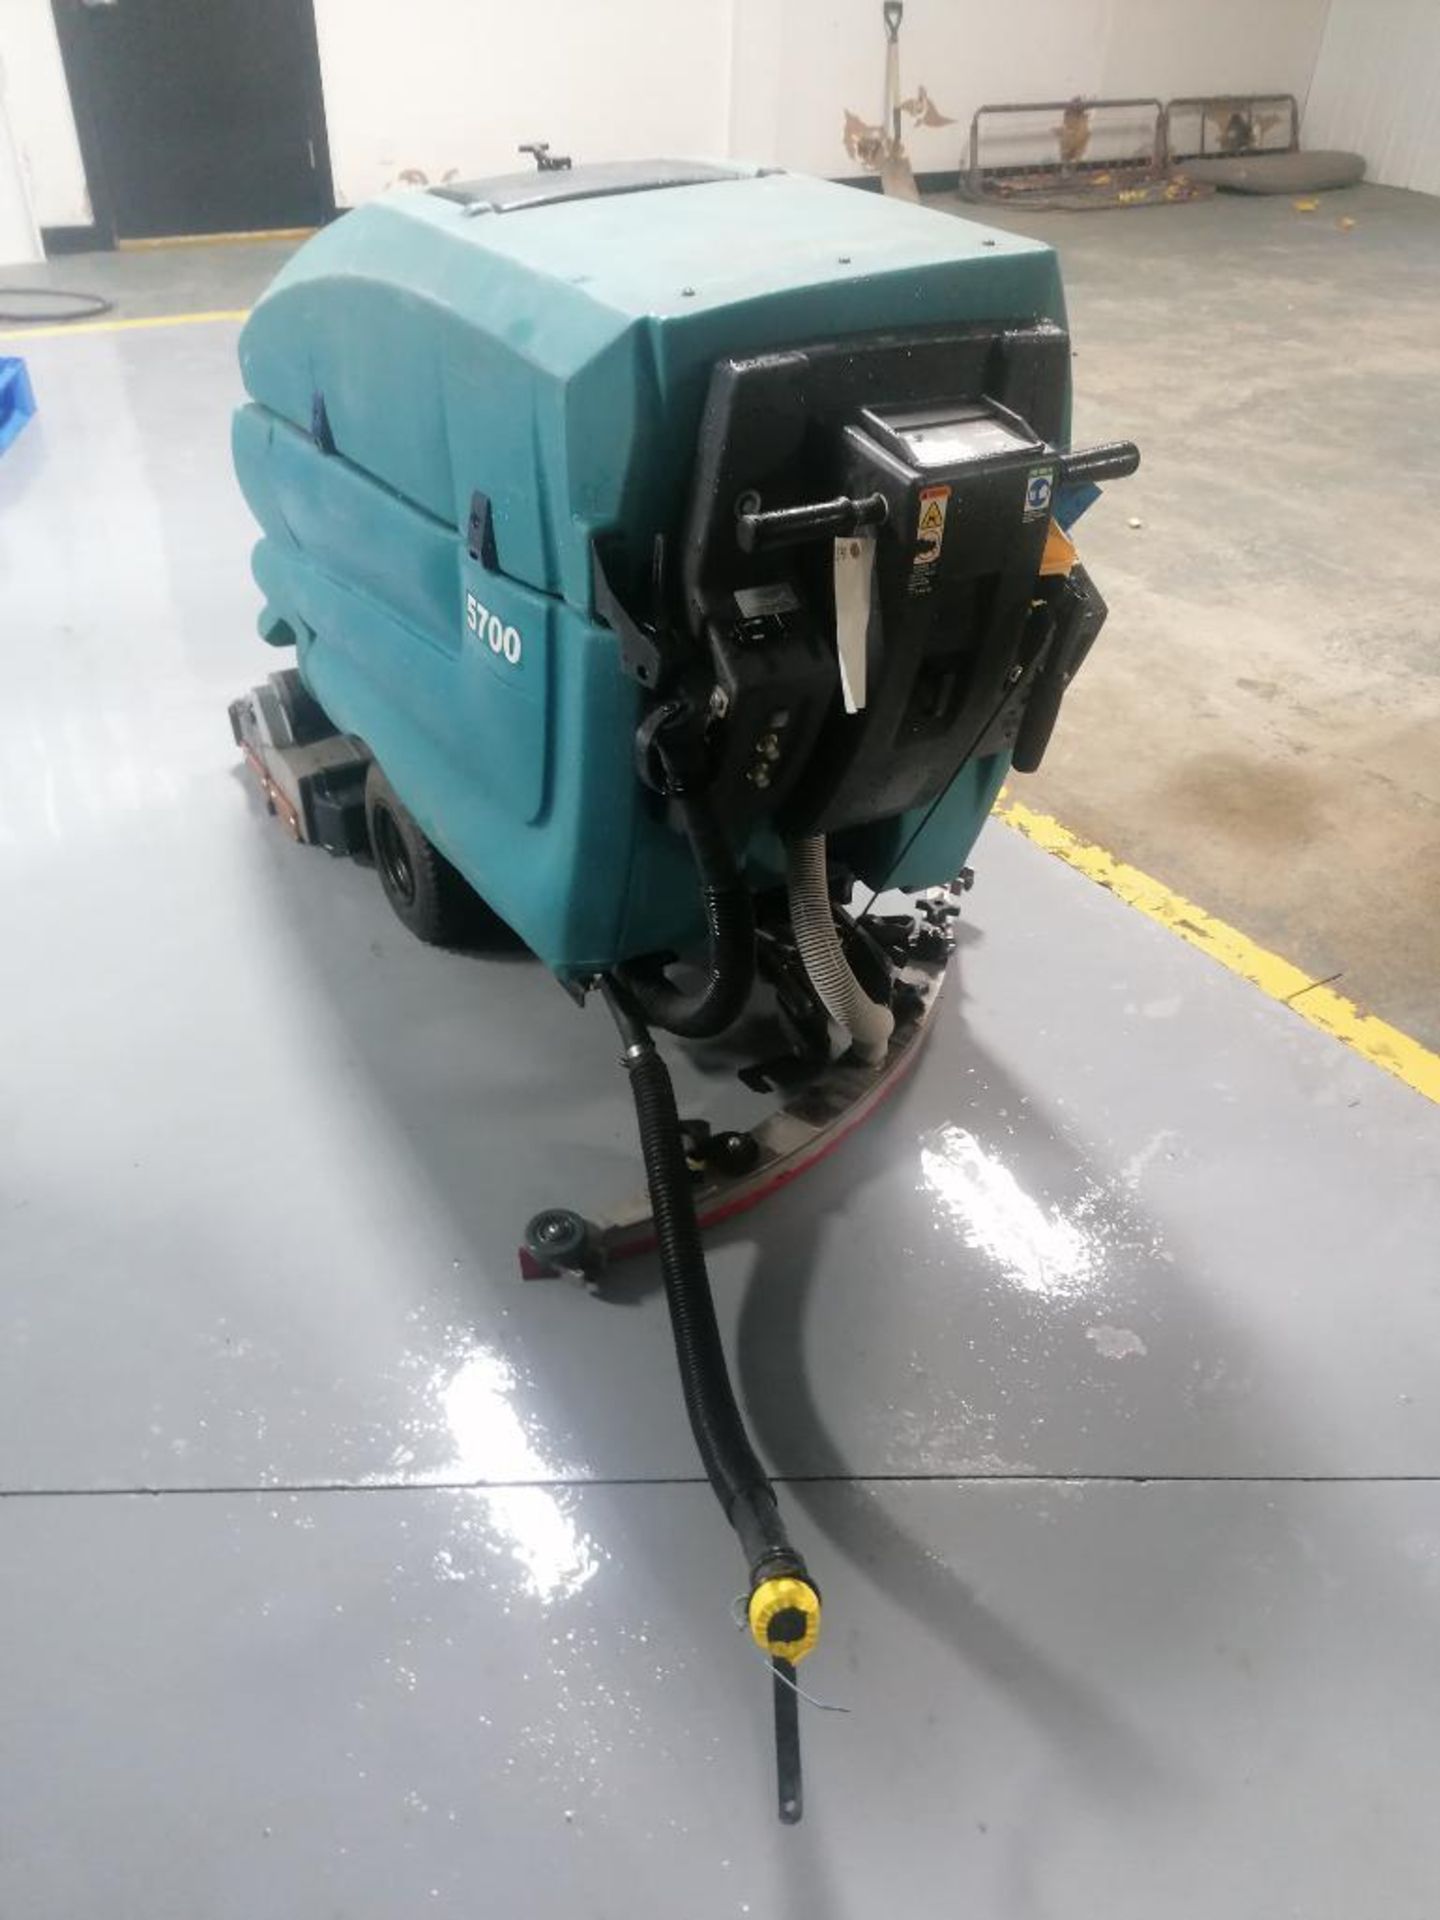 Tennant 5700 Floor Scrubber, Serial #15394, 36 V. Located in Mt. Pleasant, IA. - Image 4 of 16